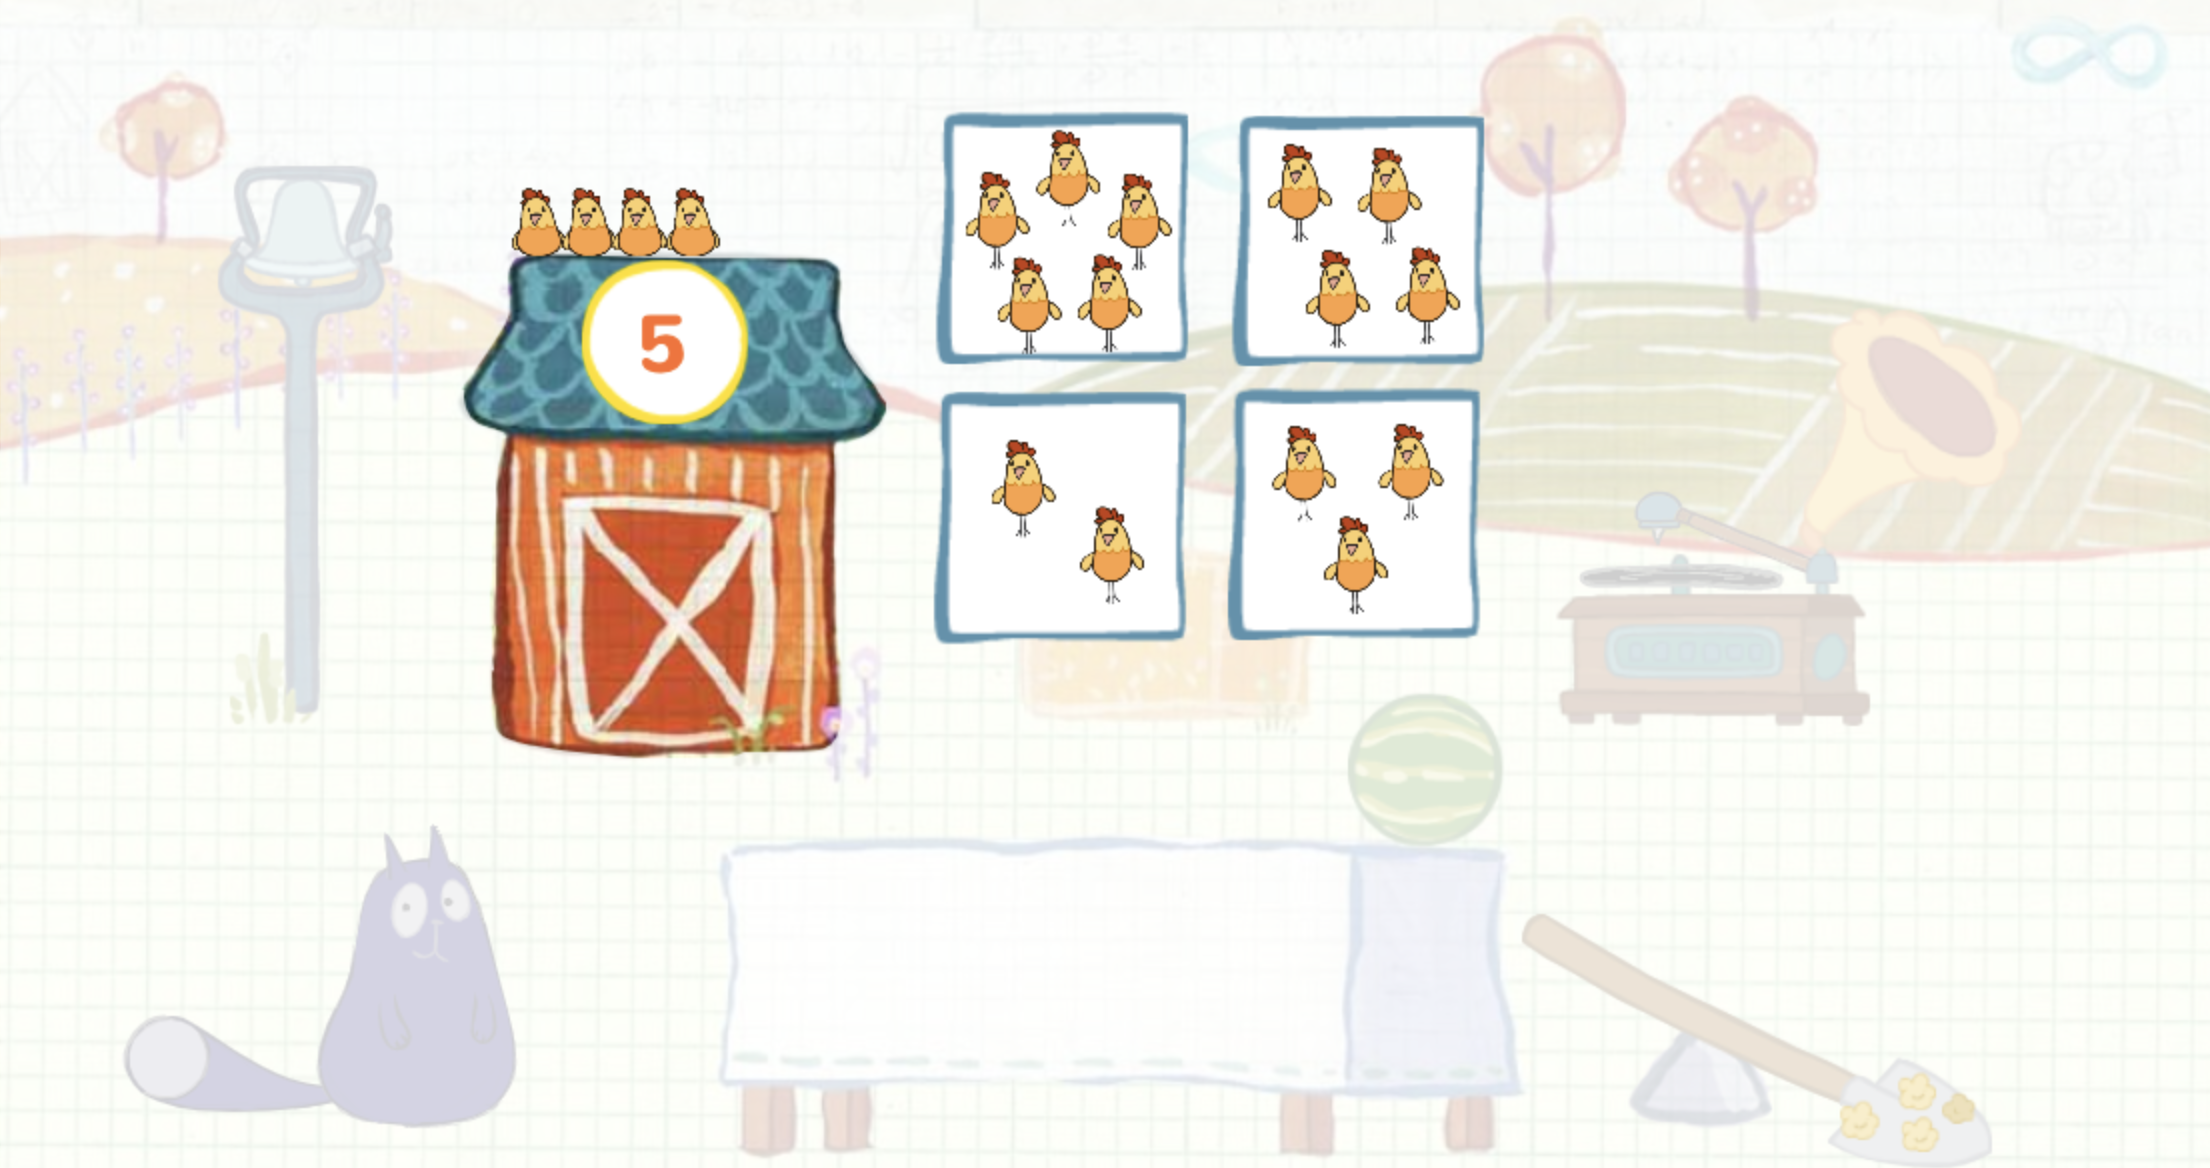 Counting items on a farm game